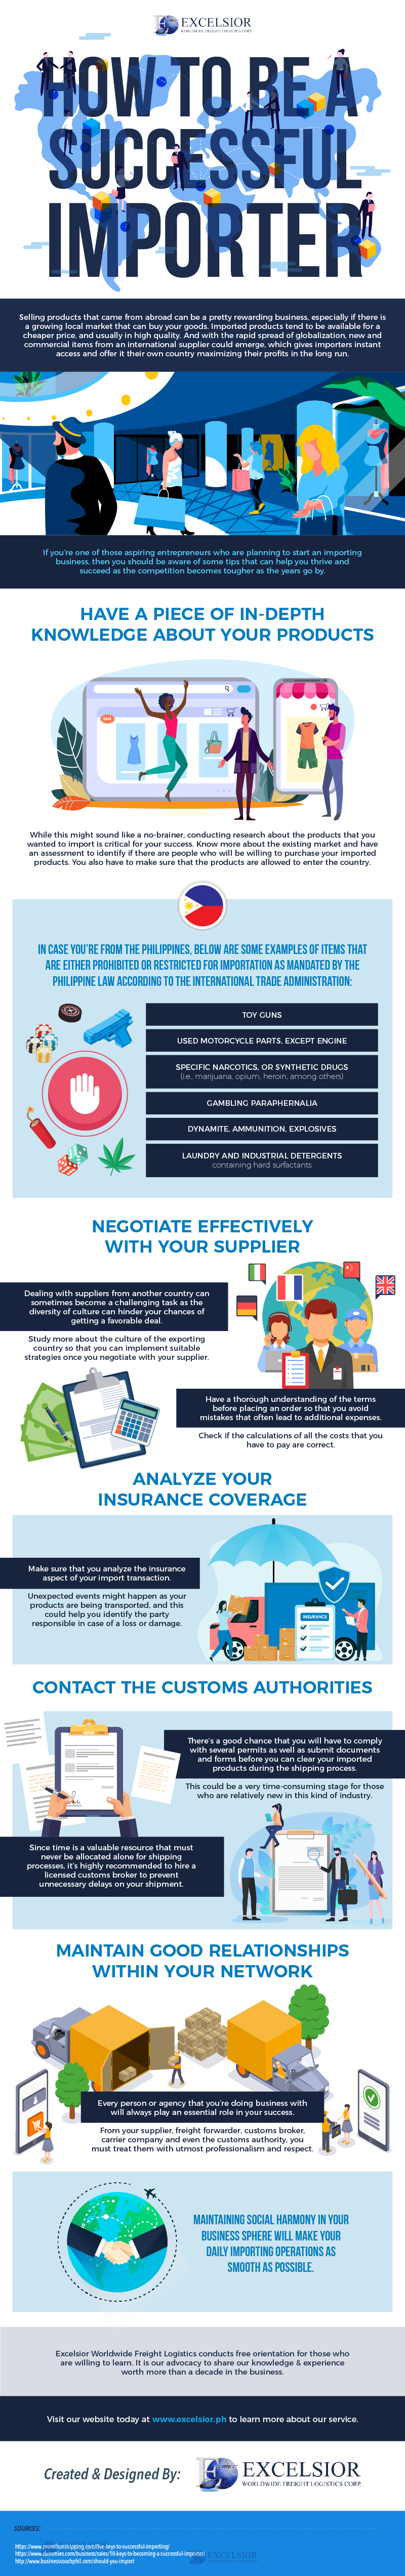 How to Be a Successful Importer - Infographic